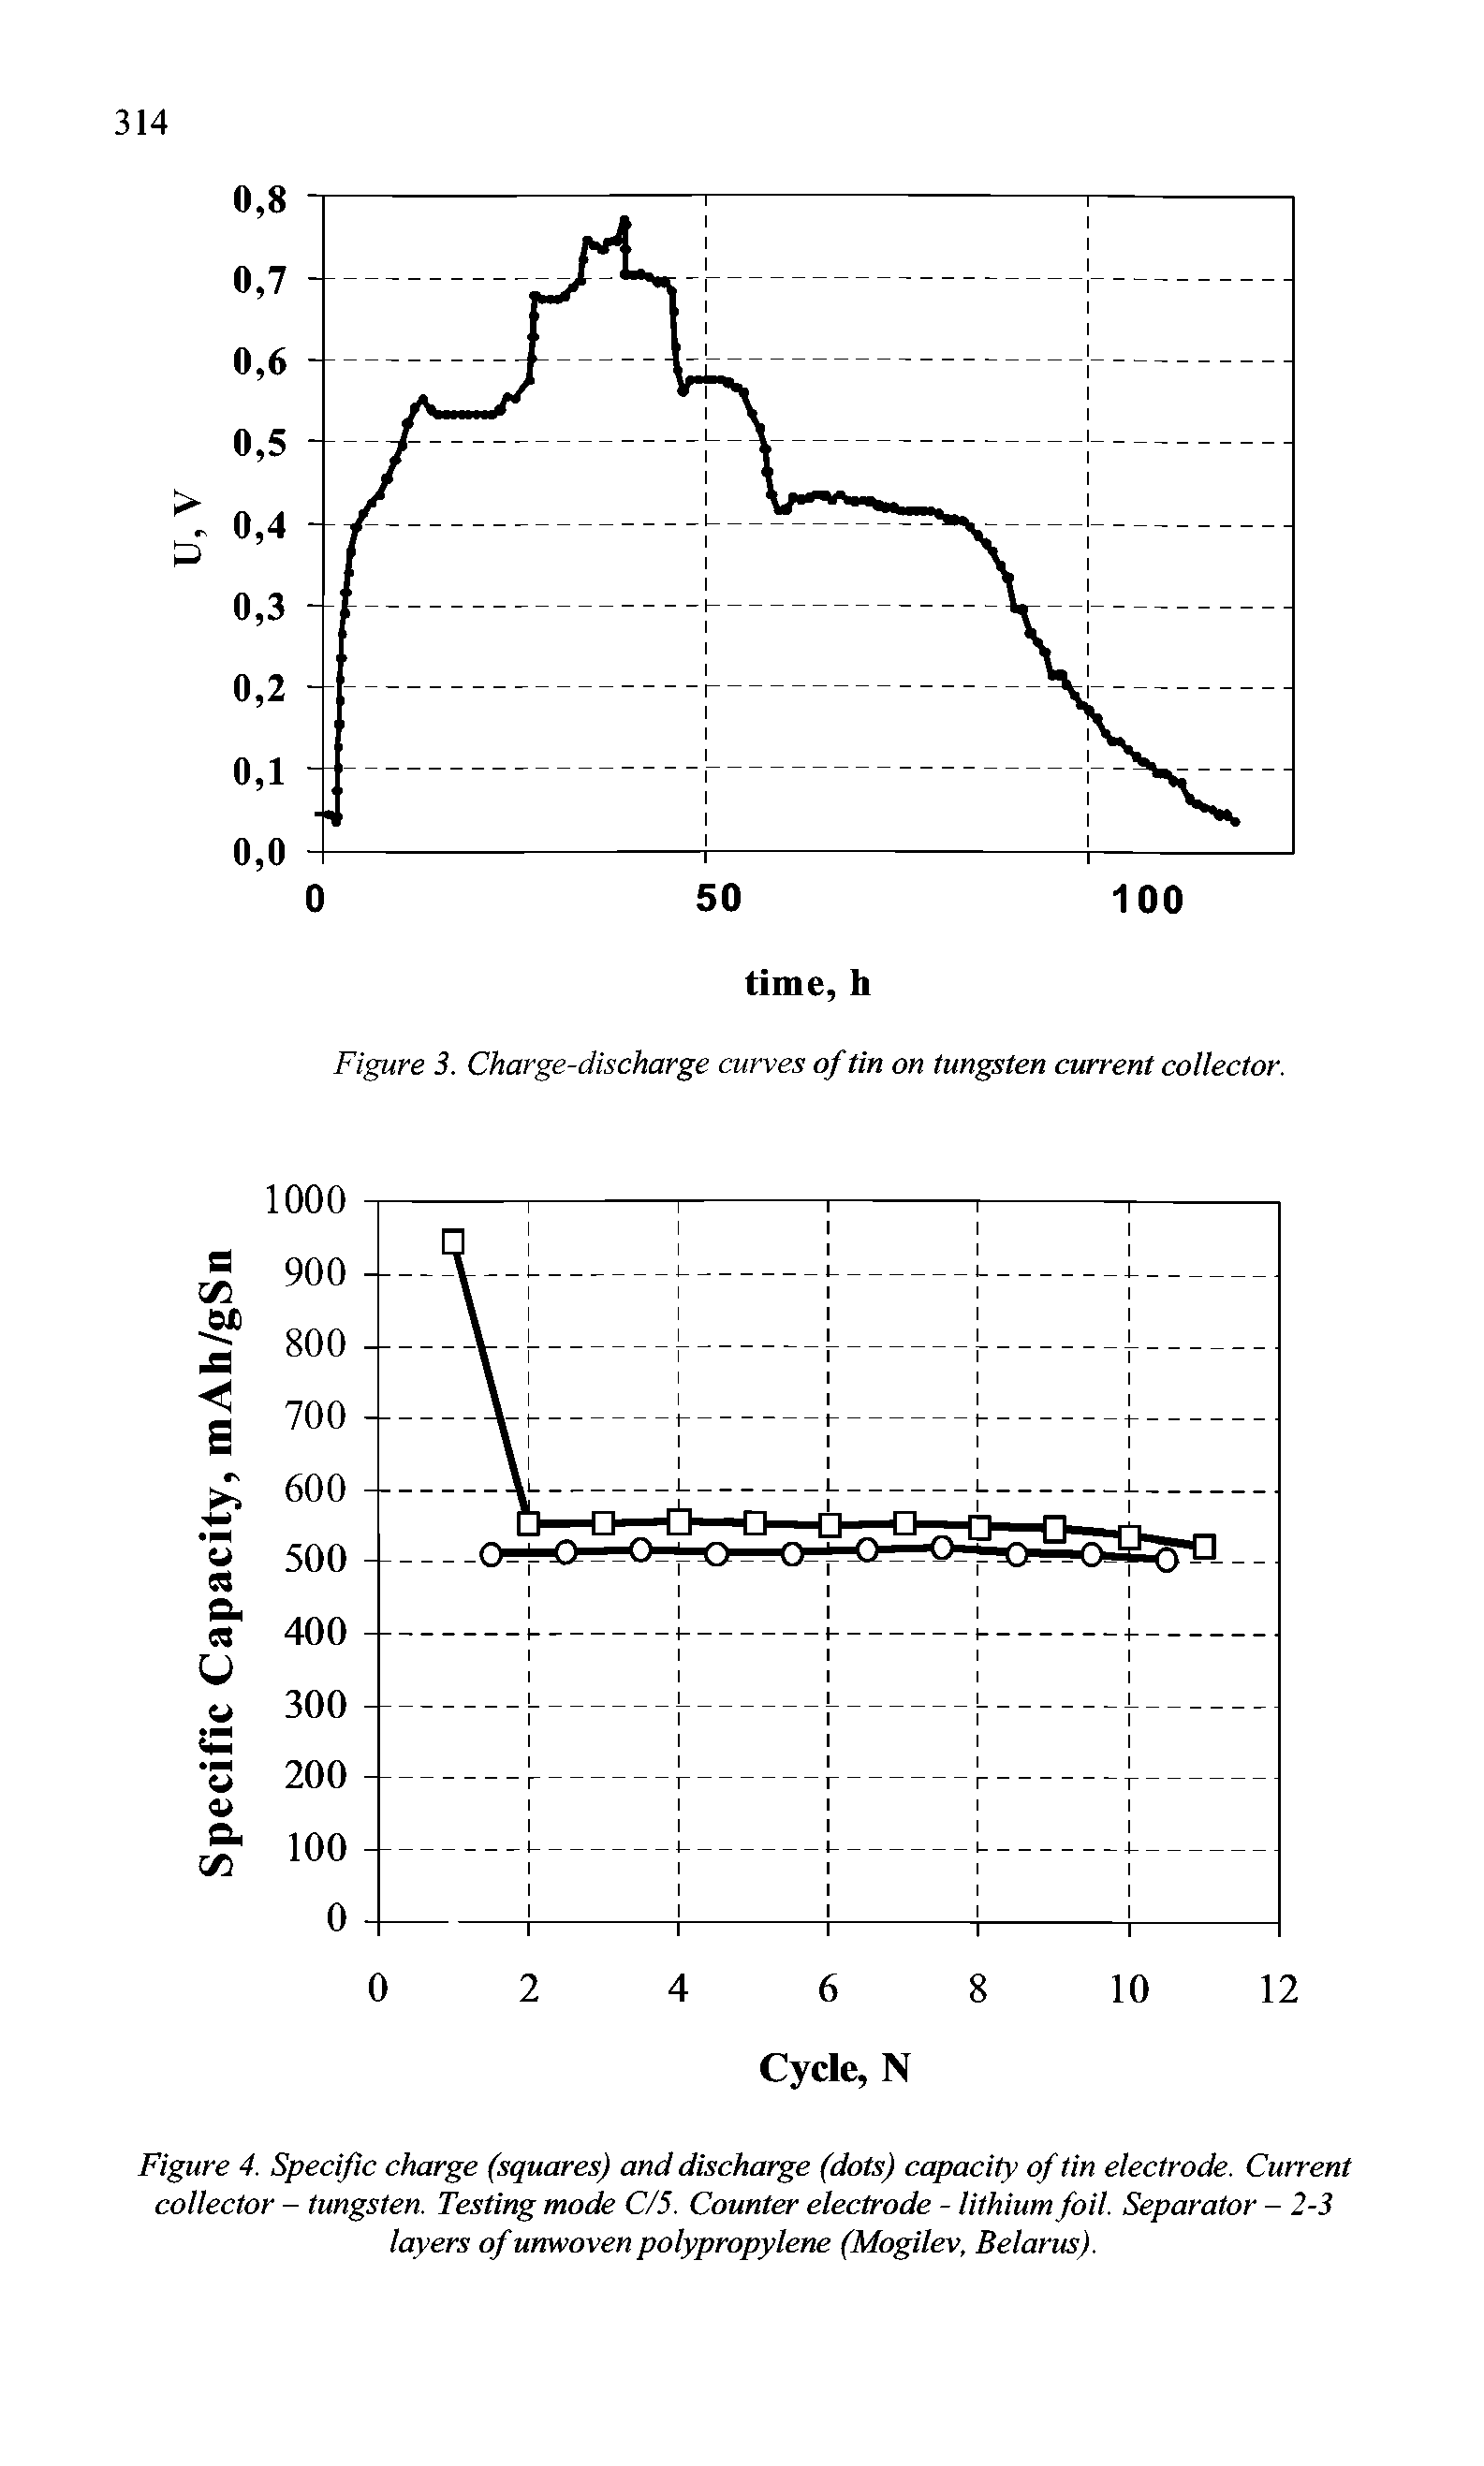 Figure 3. Charge-discharge curves of tin on tungsten current collector.